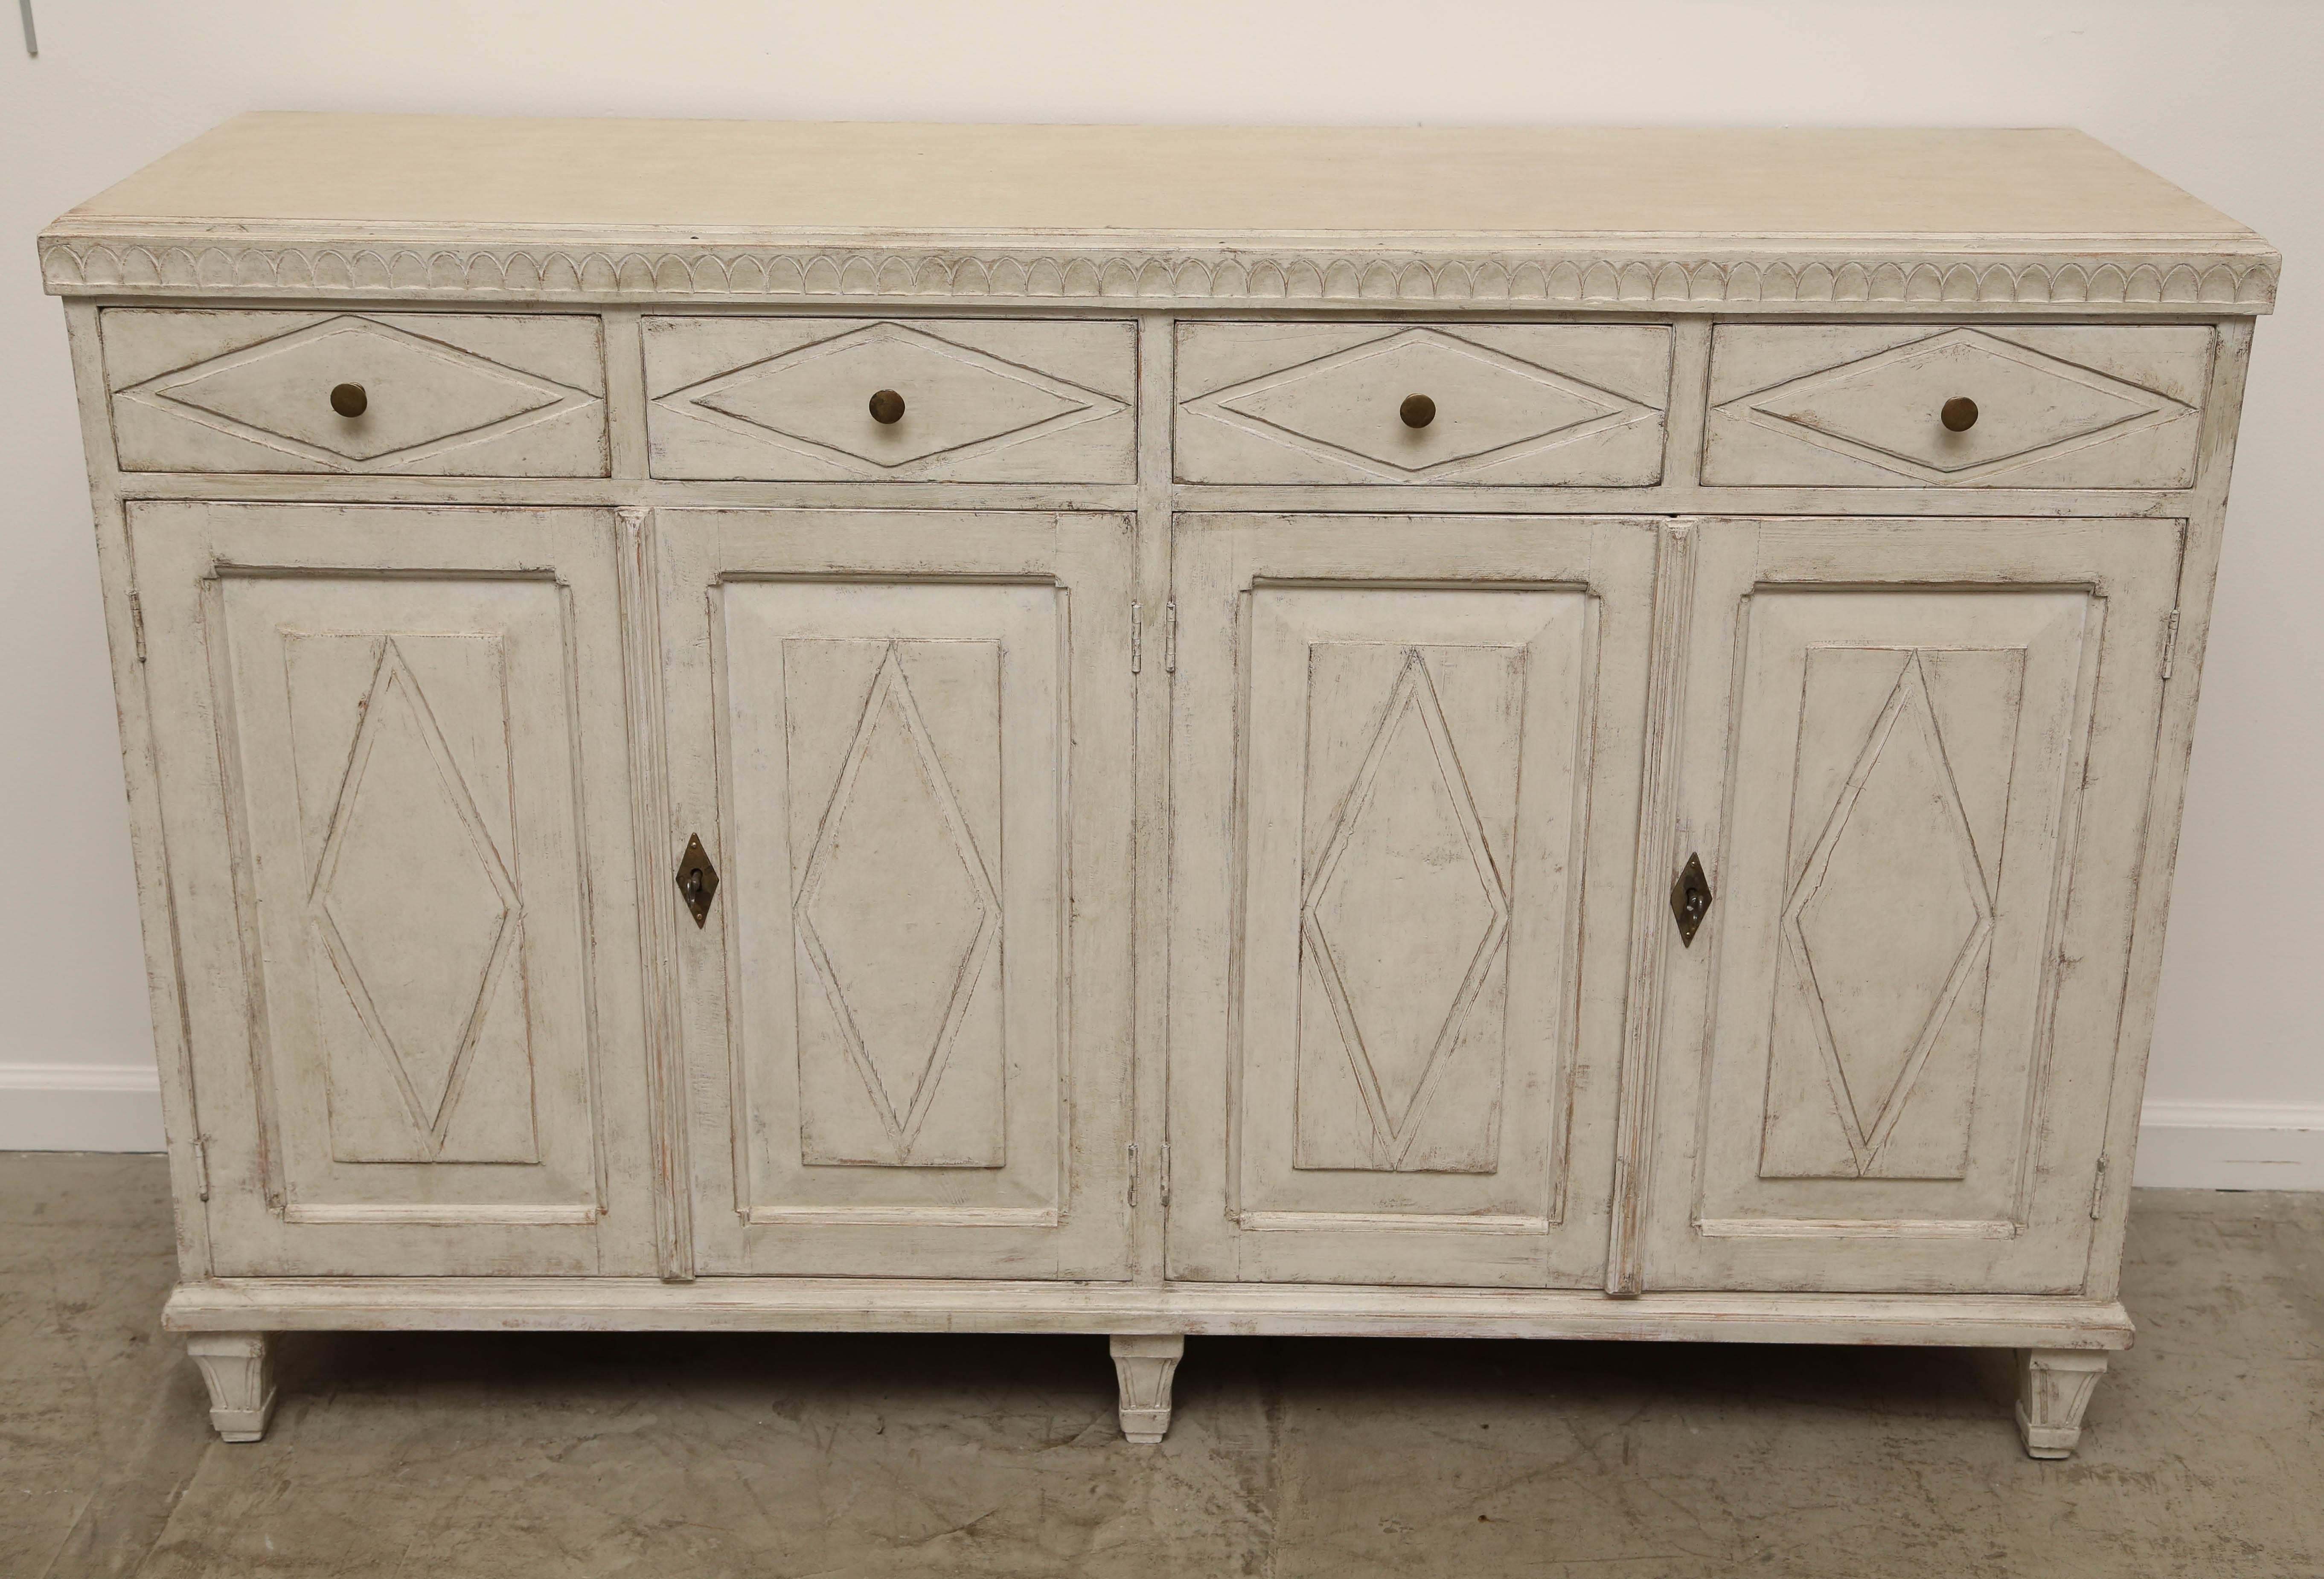 Antique Swedish Gustavian Style painted four-door sideboard with four diamond shaped doors and drawers with lambs tongue moulding beneath top, one interior shelf.  The paint has been refreshed in traditional distressed Gustavian white. Original